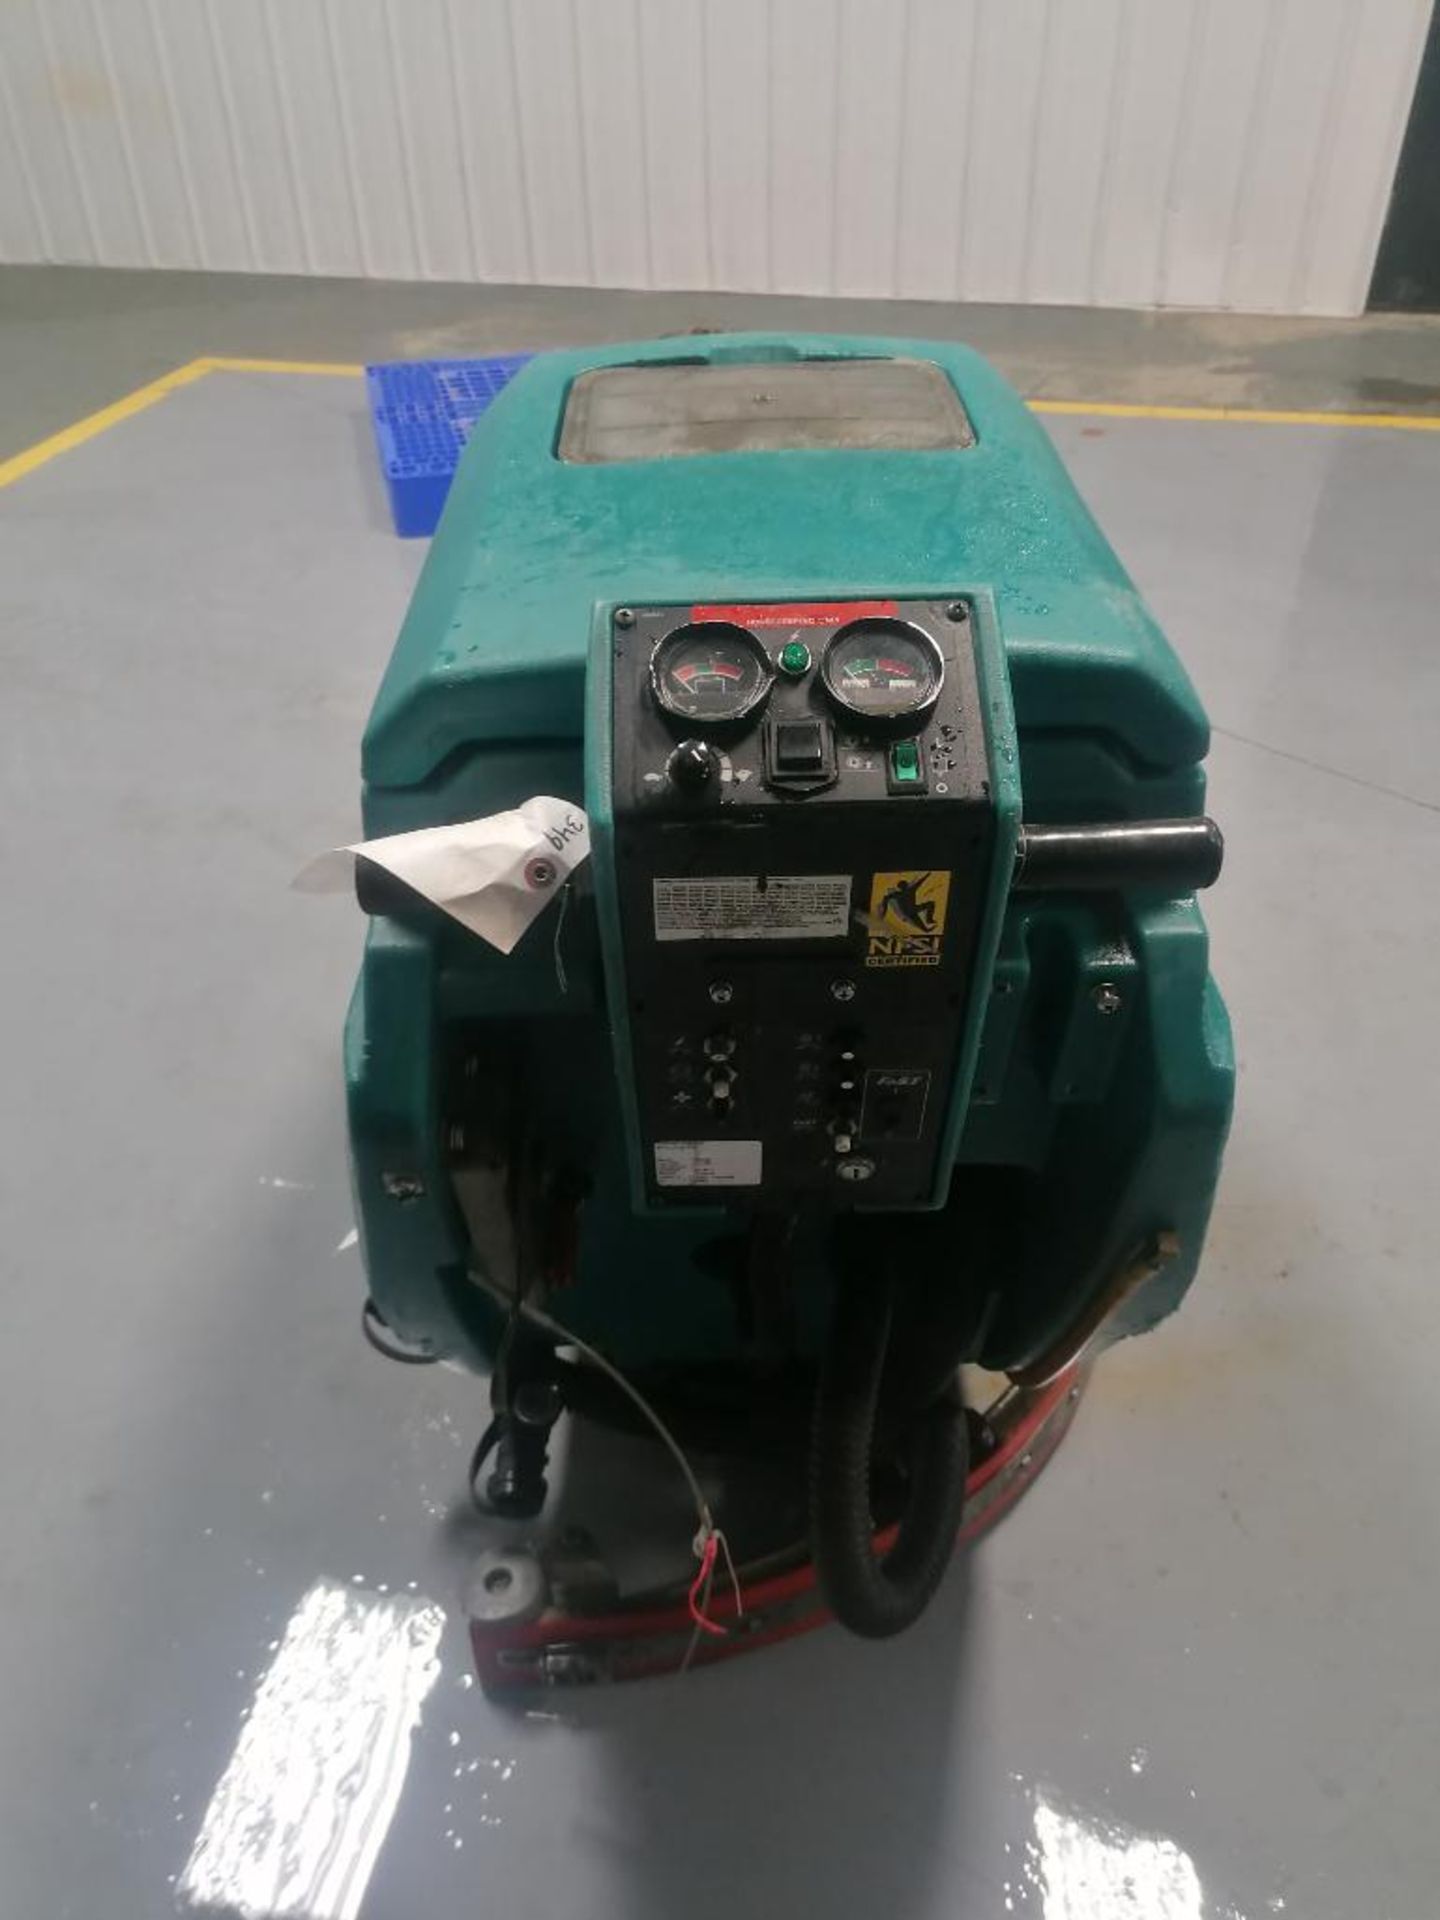 Tennant 5400 Floor Scrubber, Serial #540010203098, 24 Volts. Located in Mt. Pleasant, IA. - Image 5 of 17